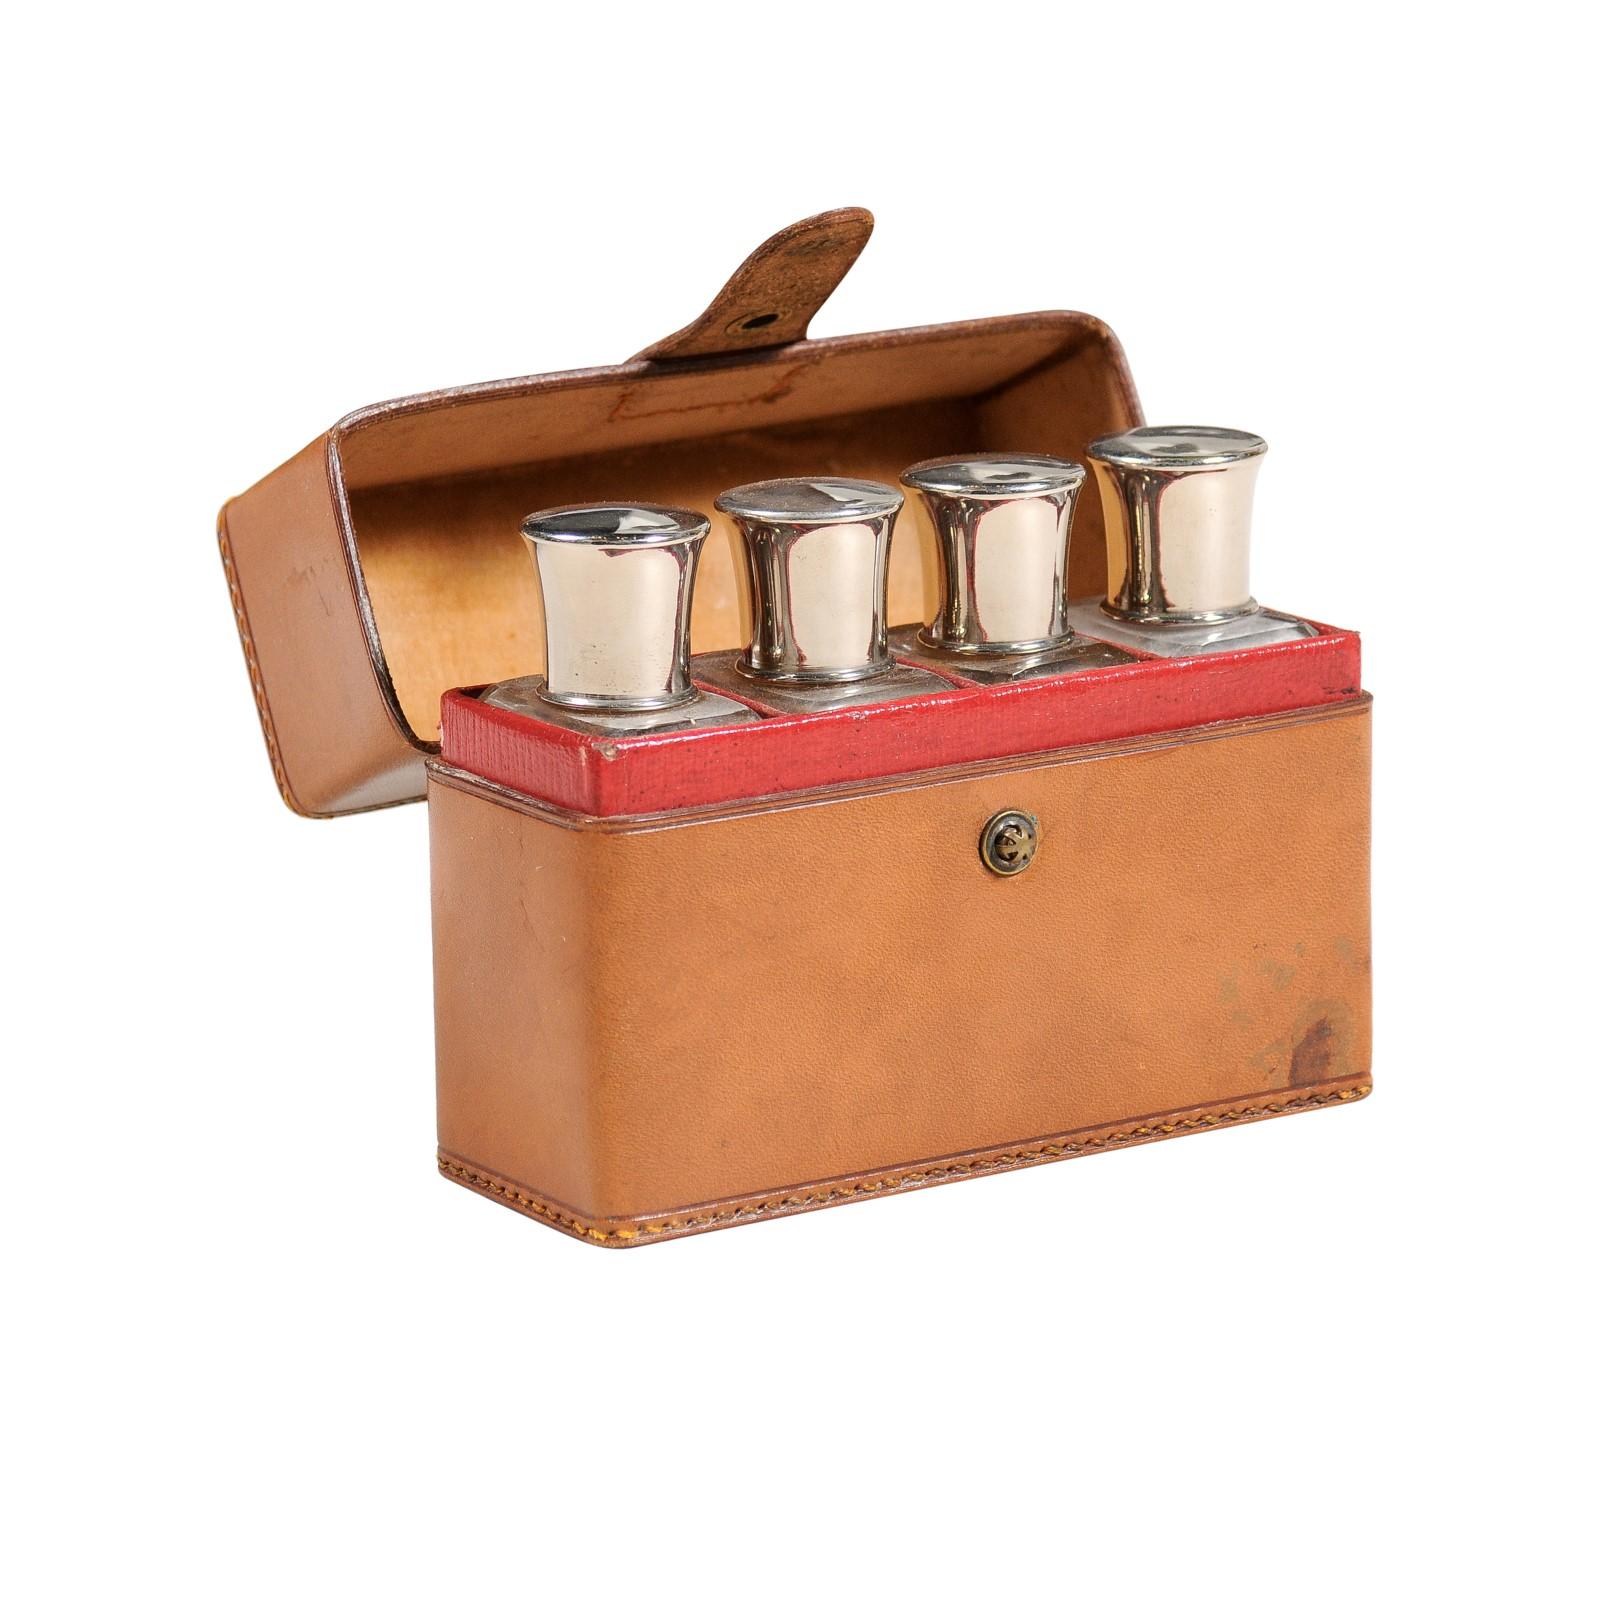 An antique English Victorian period light brown leather toiletry travel set from the late 19th century with four clear glass bottles and in-curving silver lids. Created in England during the later years of Queen Victoria's reign in the 19th century,